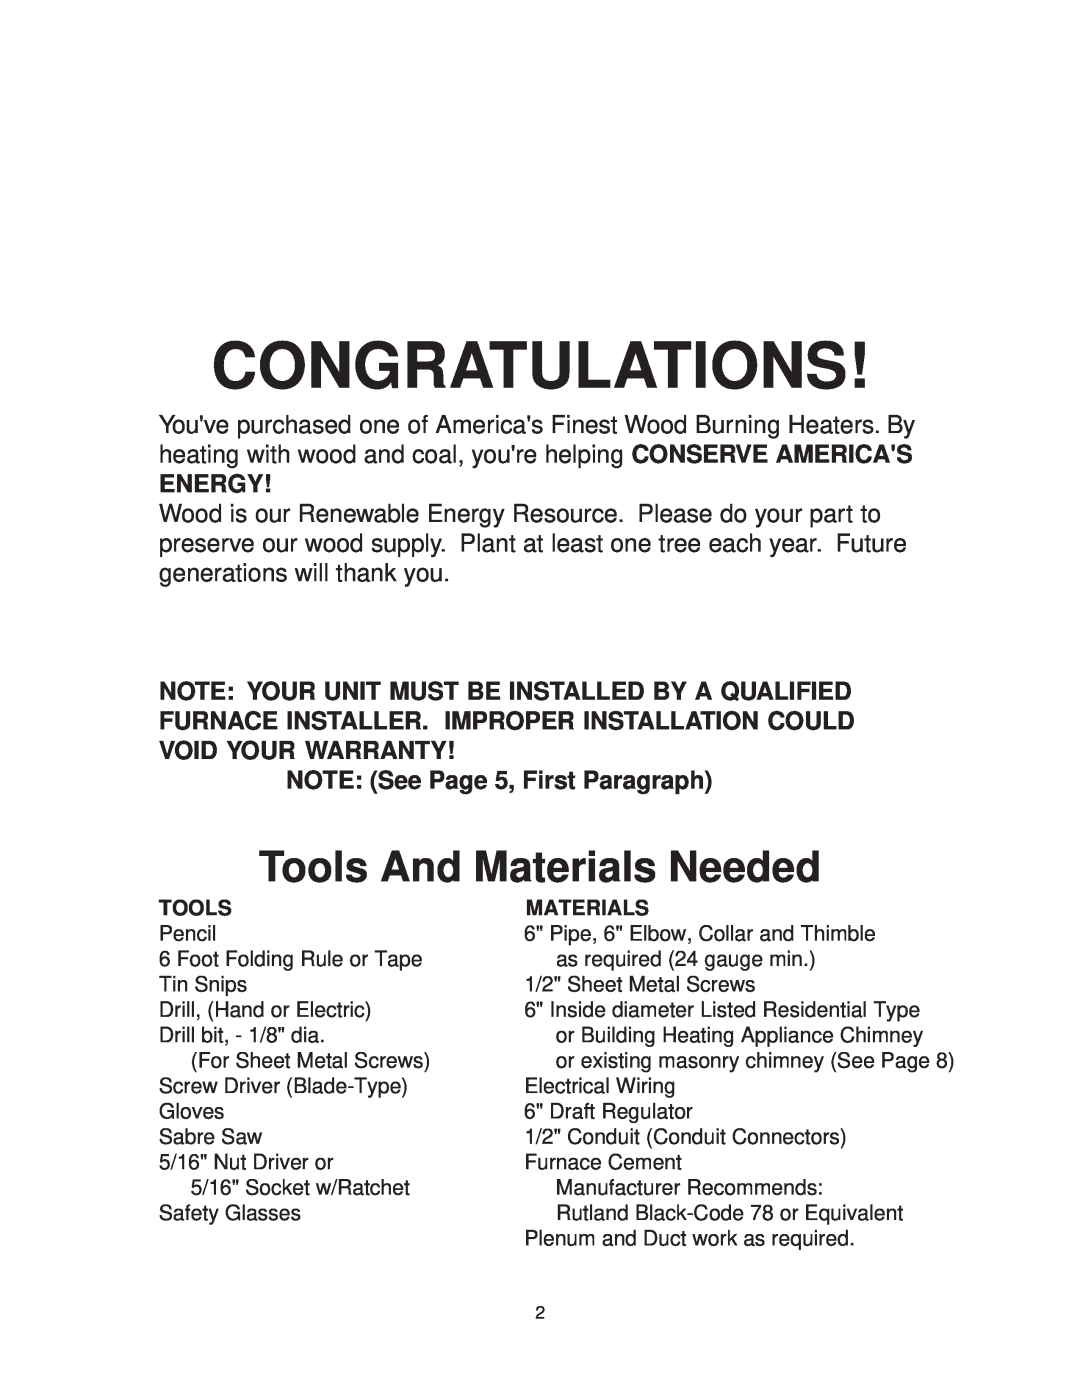 United States Stove 1321 warranty Tools And Materials Needed, Energy, NOTE See Page 5, First Paragraph, Congratulations 